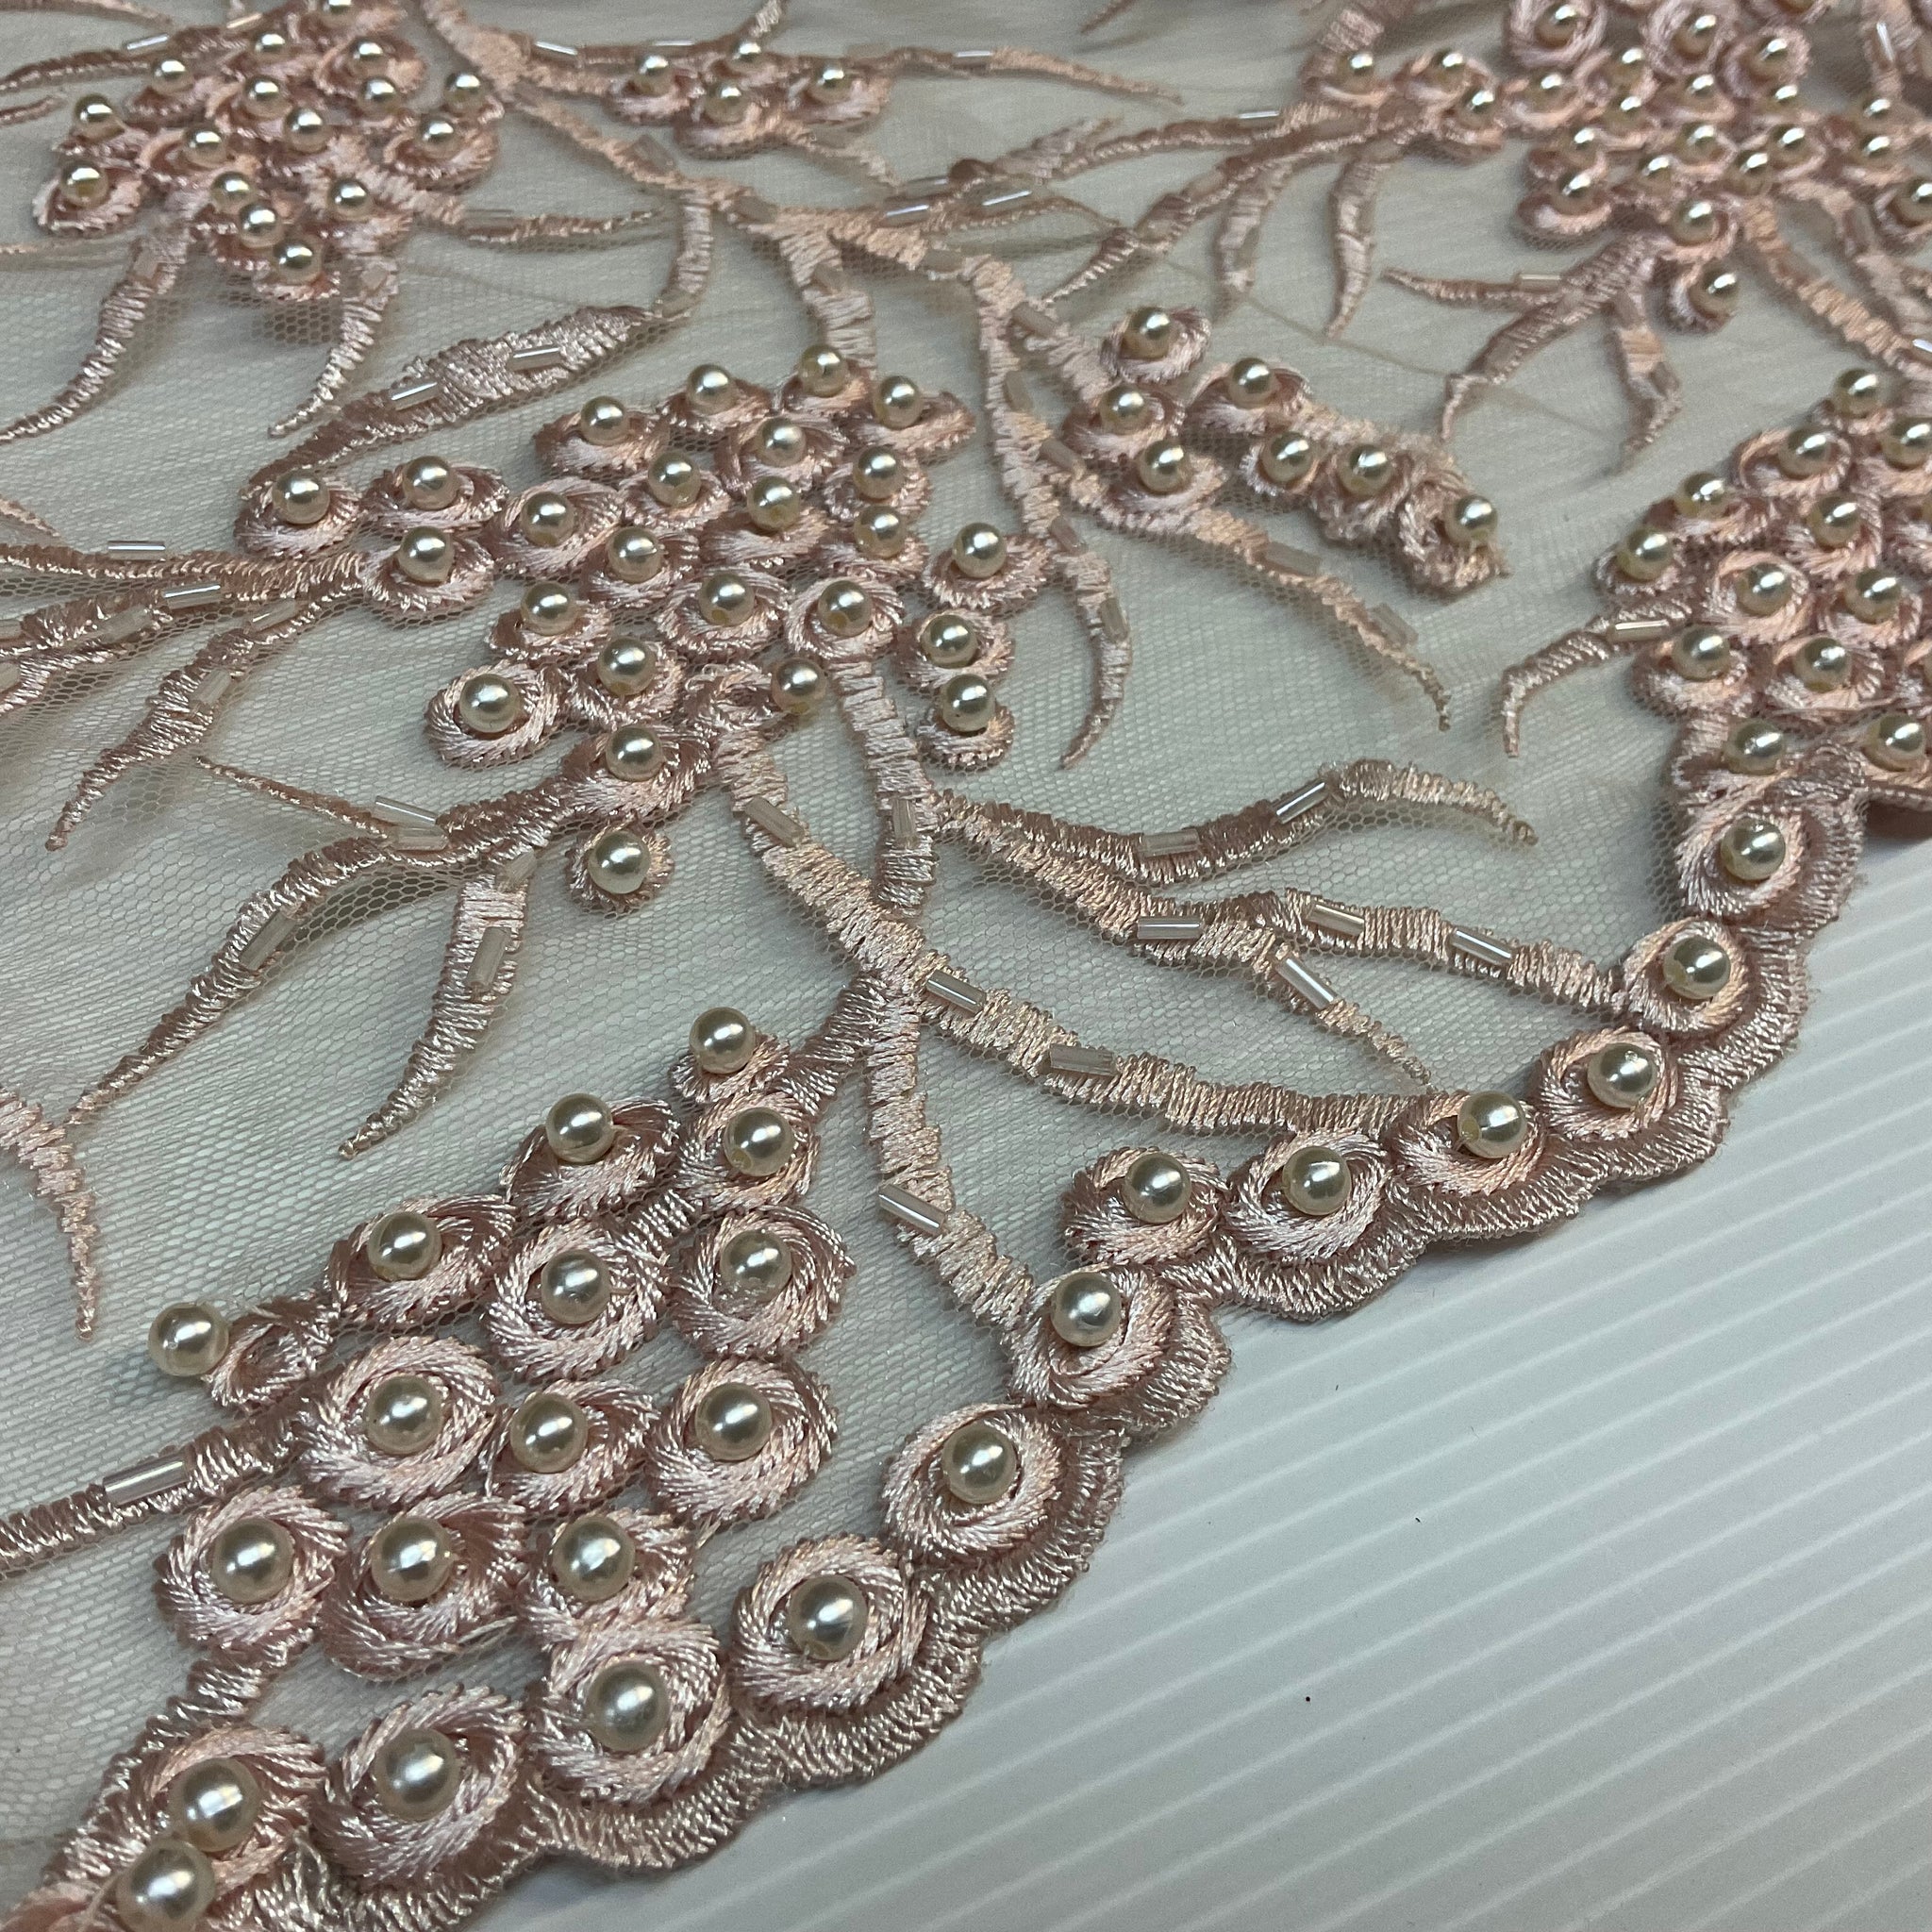 Blush embroidery lace with Blush faux pearls and Blush bungle beads - Double scalloped border Fabric - M1400-37